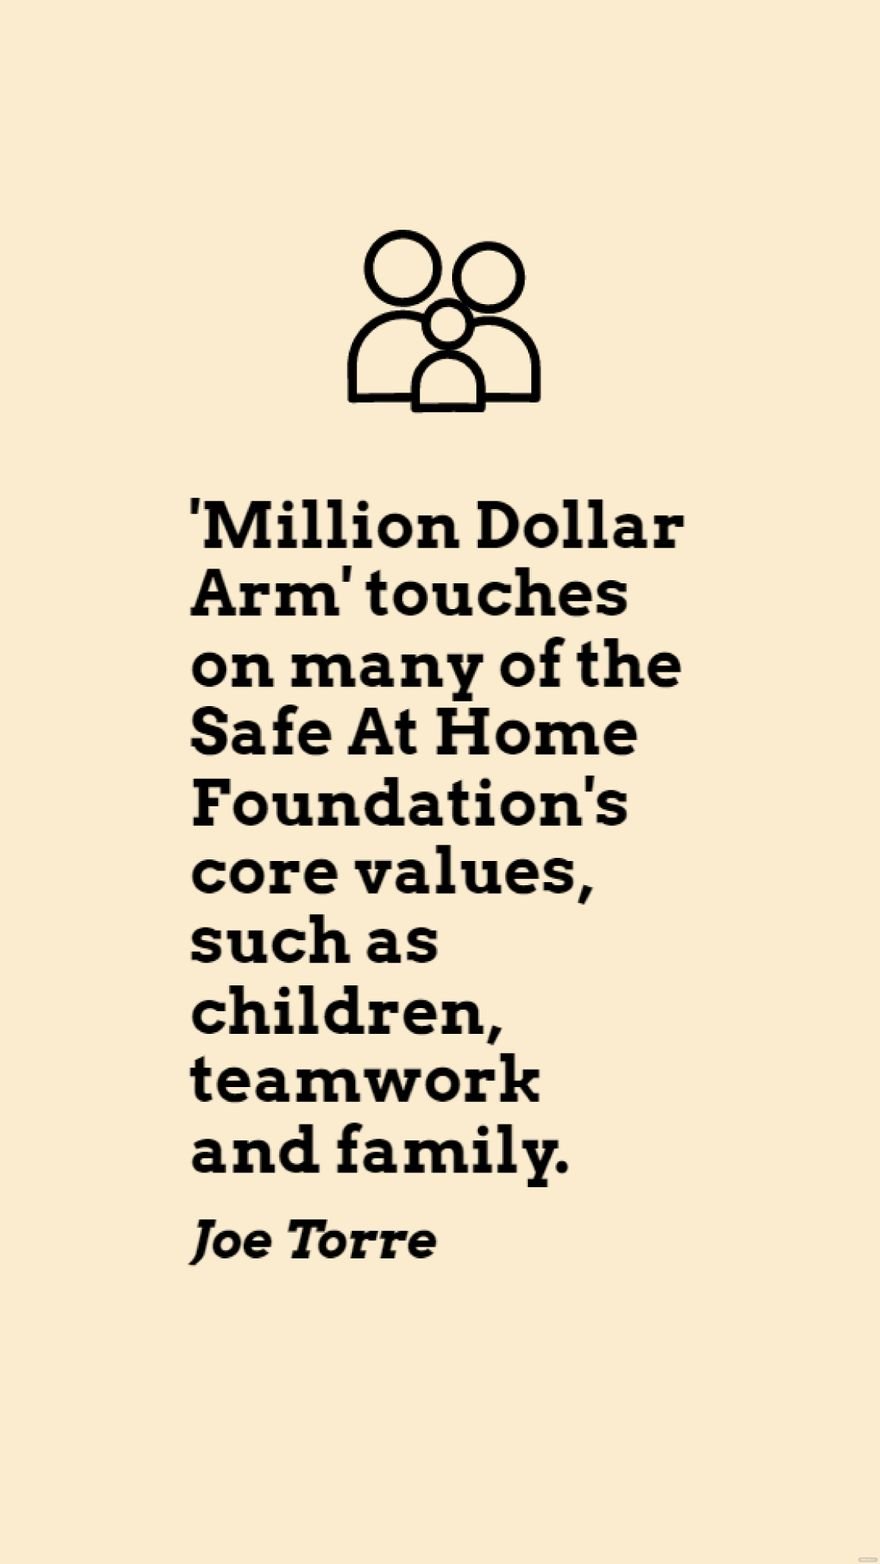 Joe Torre - 'Million Dollar Arm' touches on many of the Safe At Home Foundation's core values, such as children, teamwork and family. in JPG